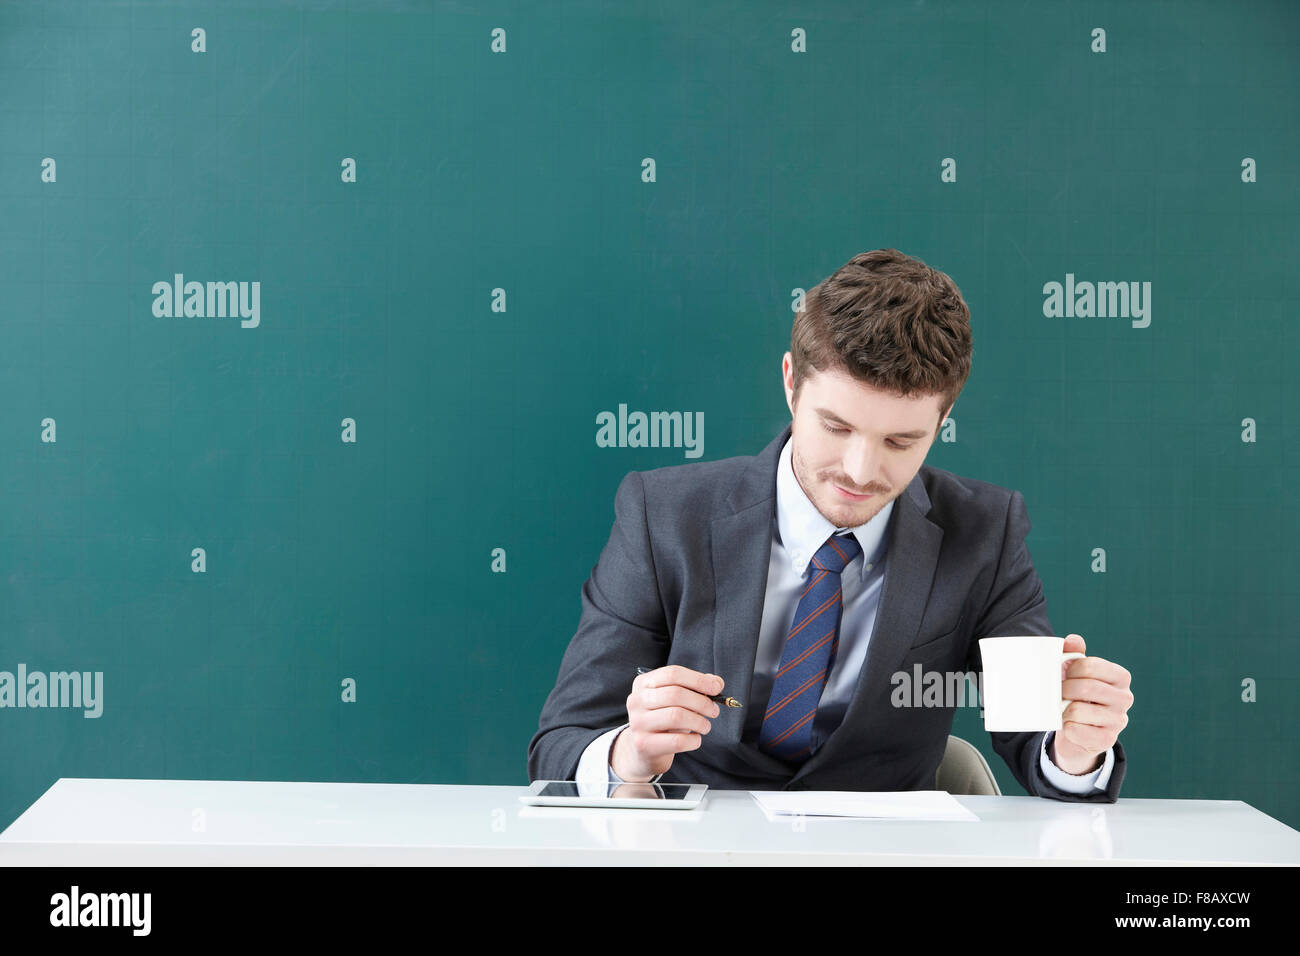 Portrait of man in suit holding a mug and a pen with tablet and paper on table in front of blackboard Stock Photo